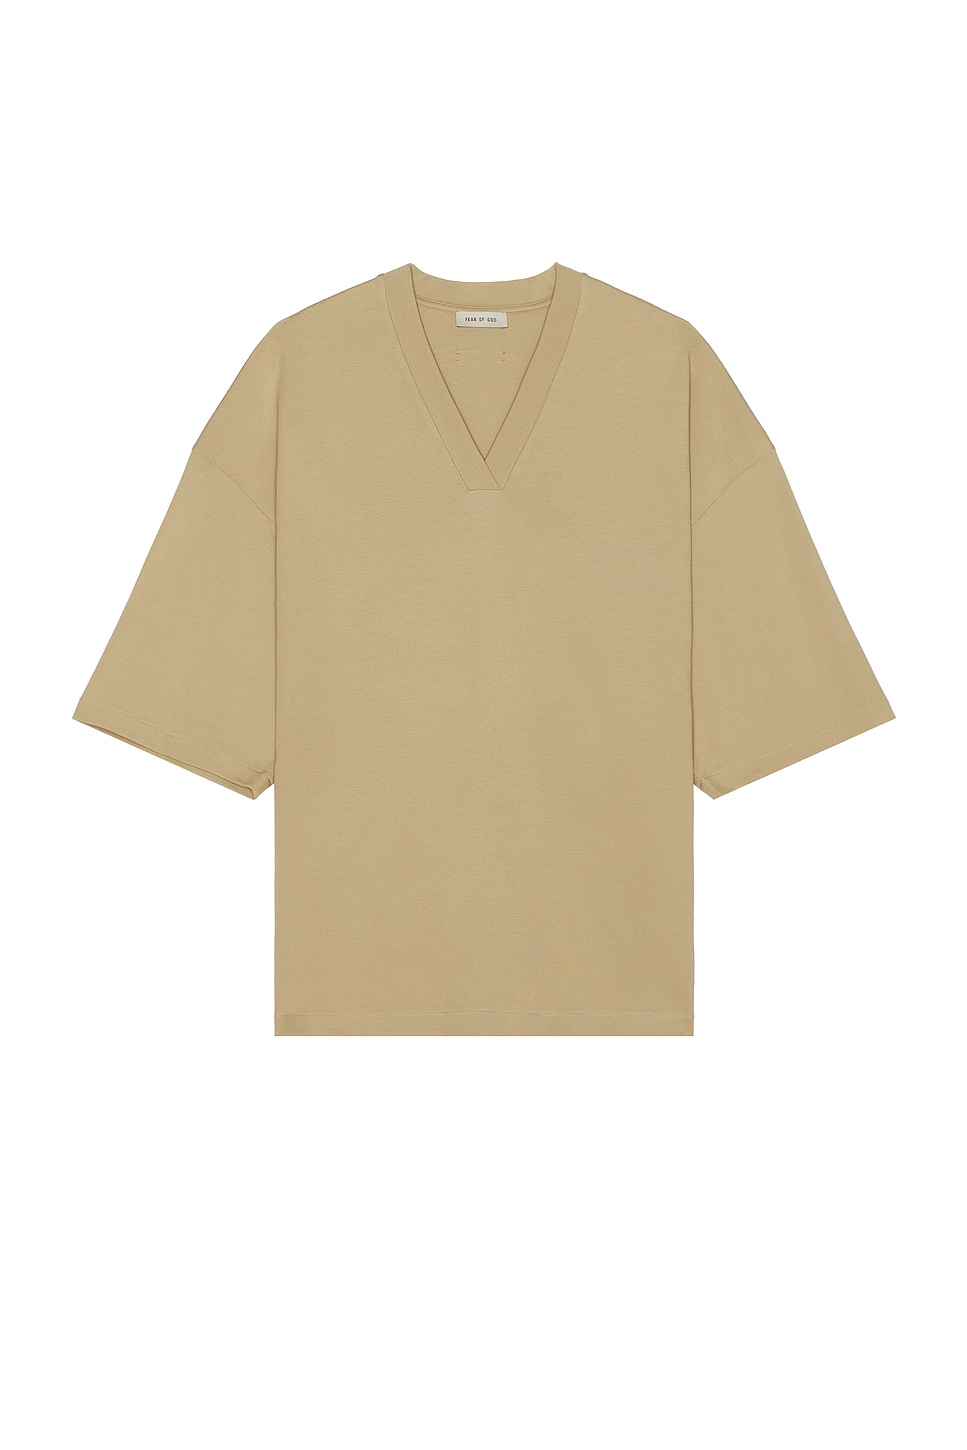 Image 1 of Fear of God Milano V Neck Tee in Dune